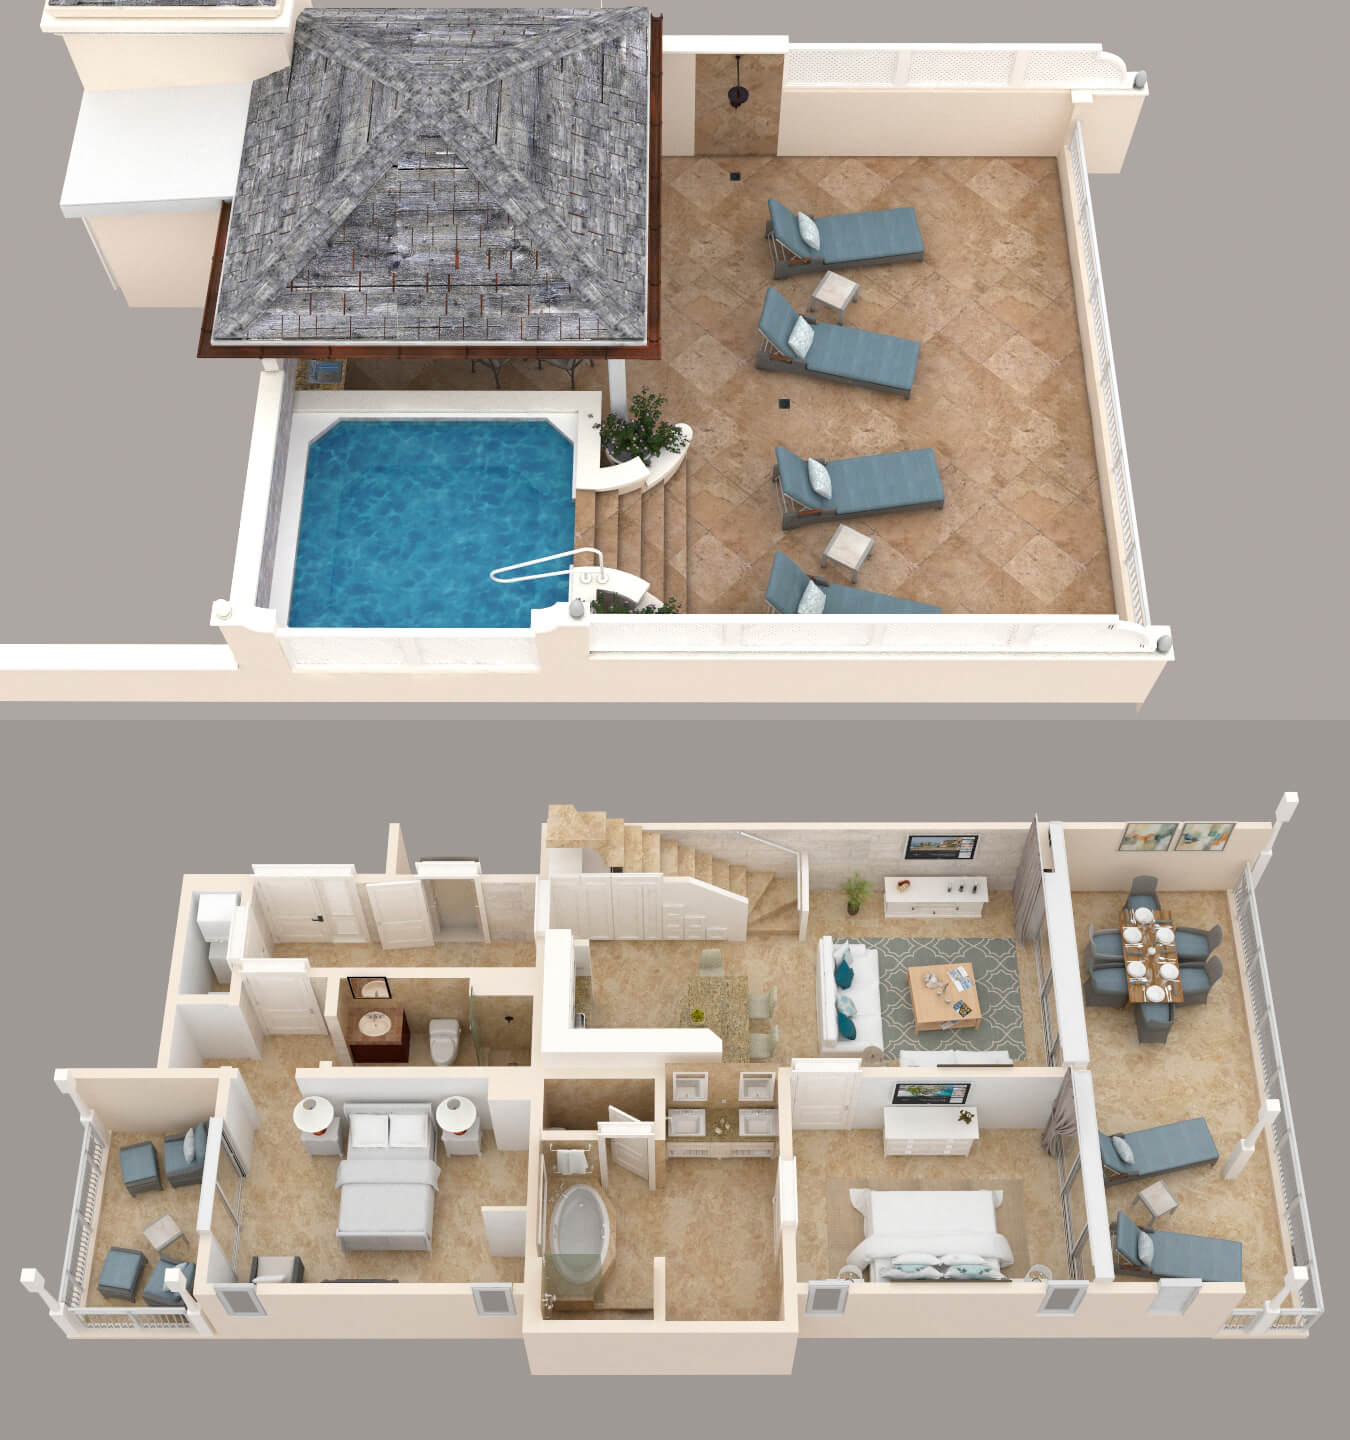 Two Bedroom Contemporary Penthouse & Rooftop Pool Floor Plan